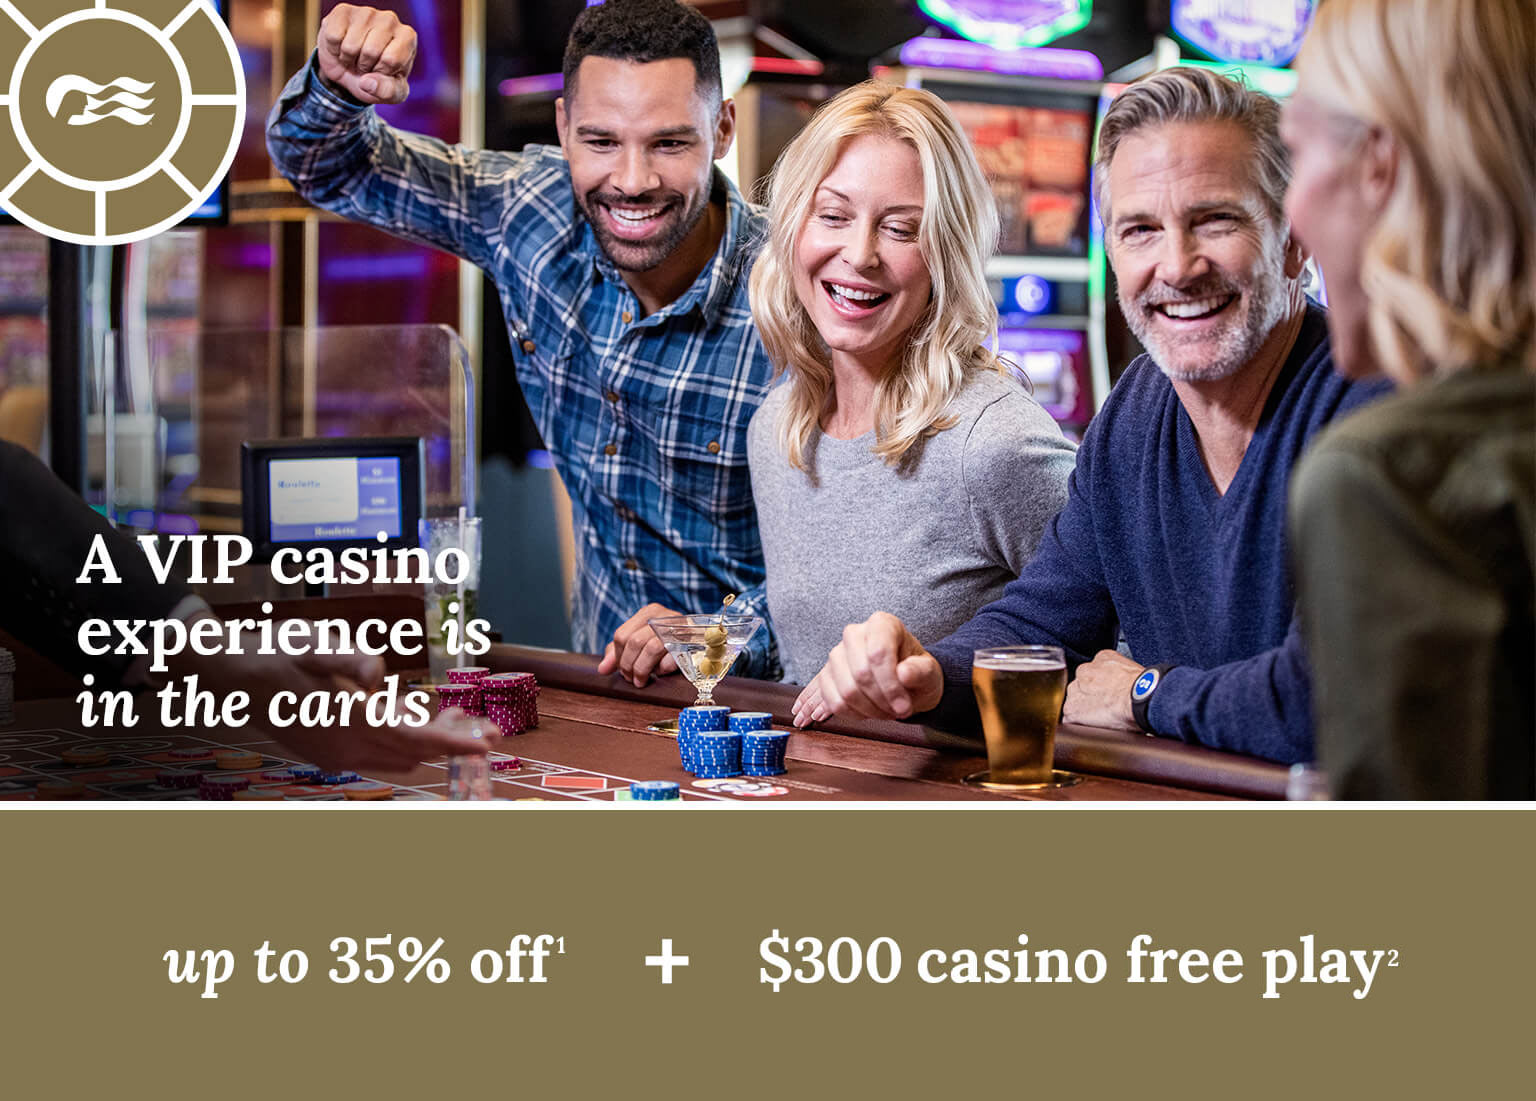 A VIP casino experience is in the cards. Up to 35% off + $300 casino free play. Click here to book.